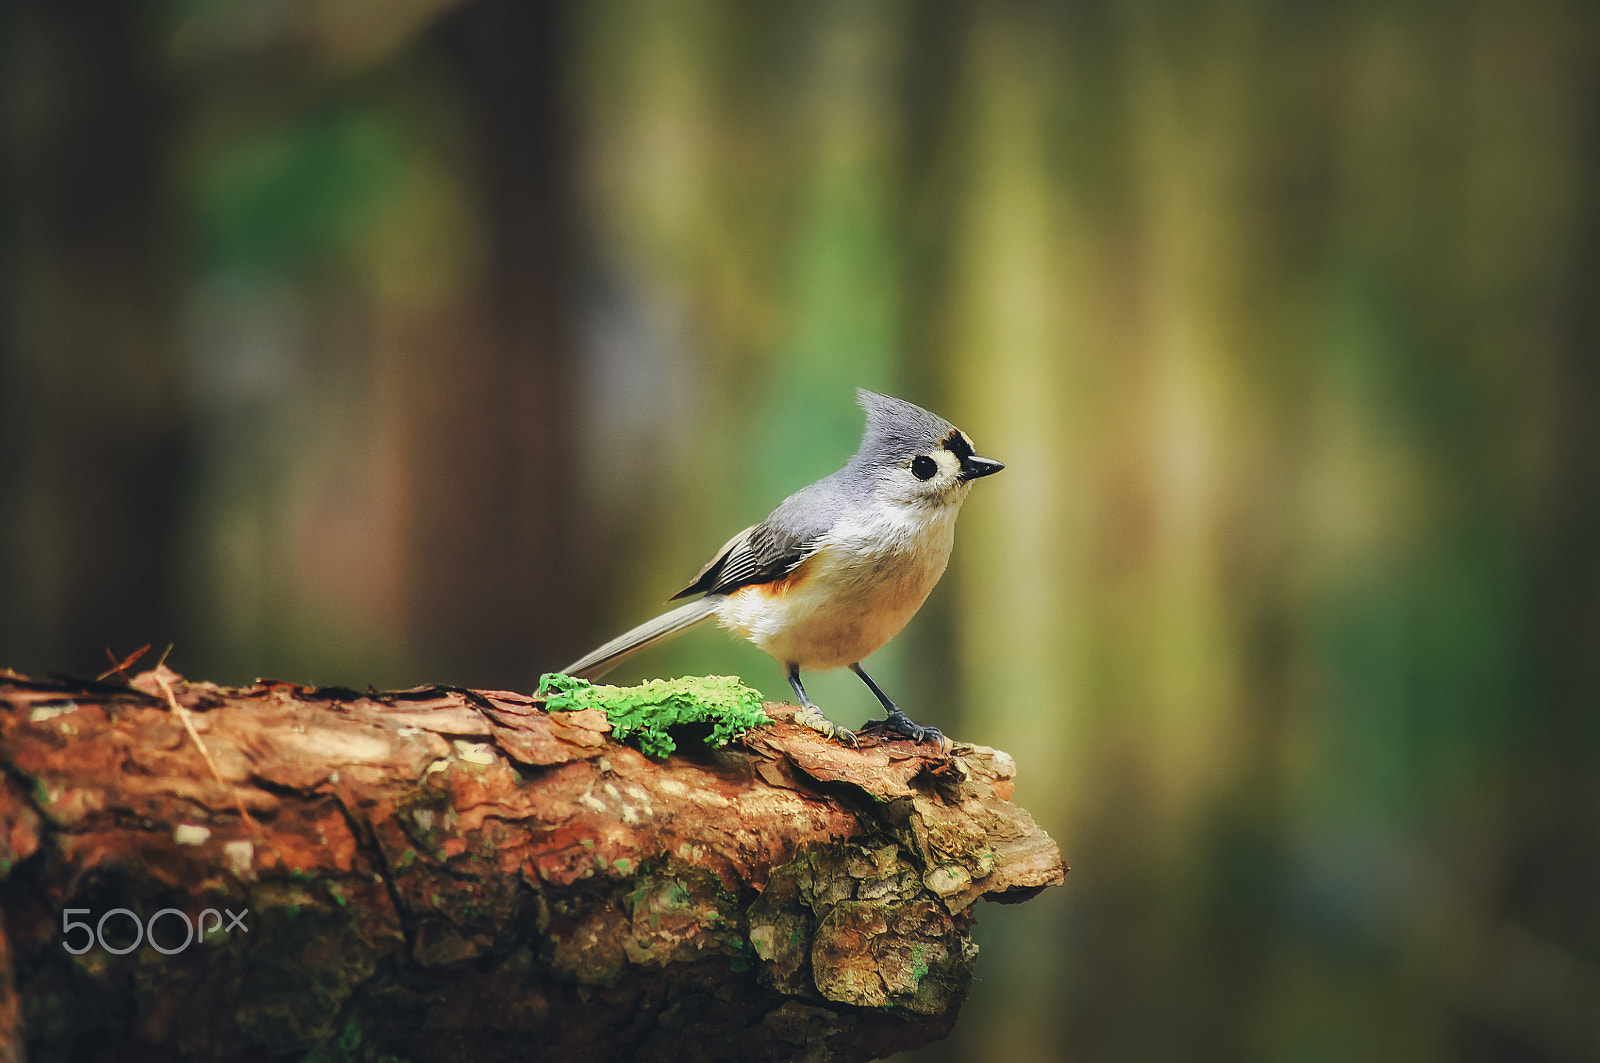 Nikon D90 sample photo. Tufted titmouse and moss photography